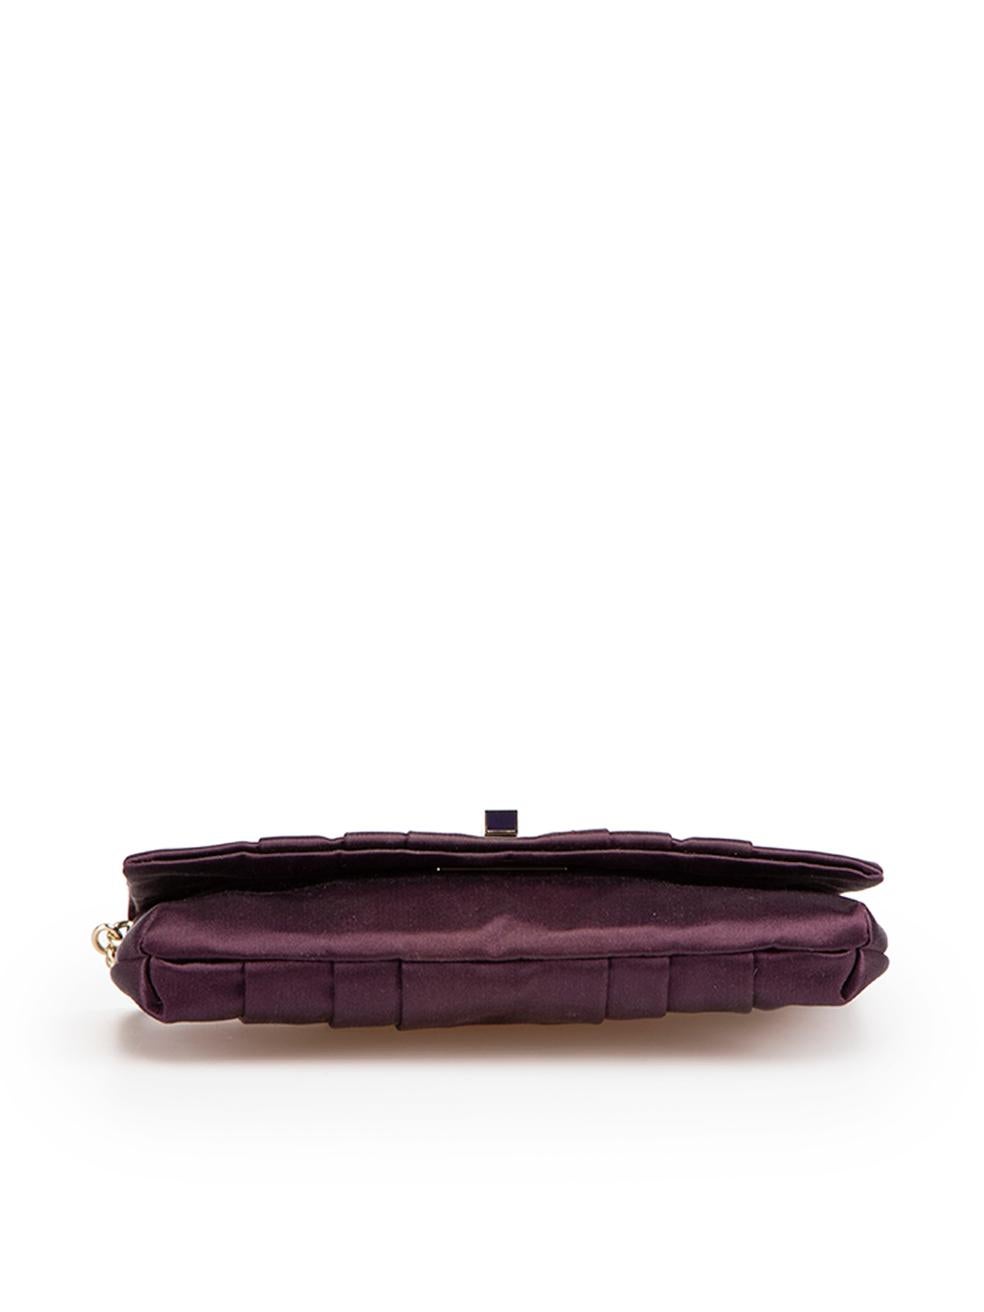 Women's Anya Hindmarch Purple Pleated Satin Clutch For Sale